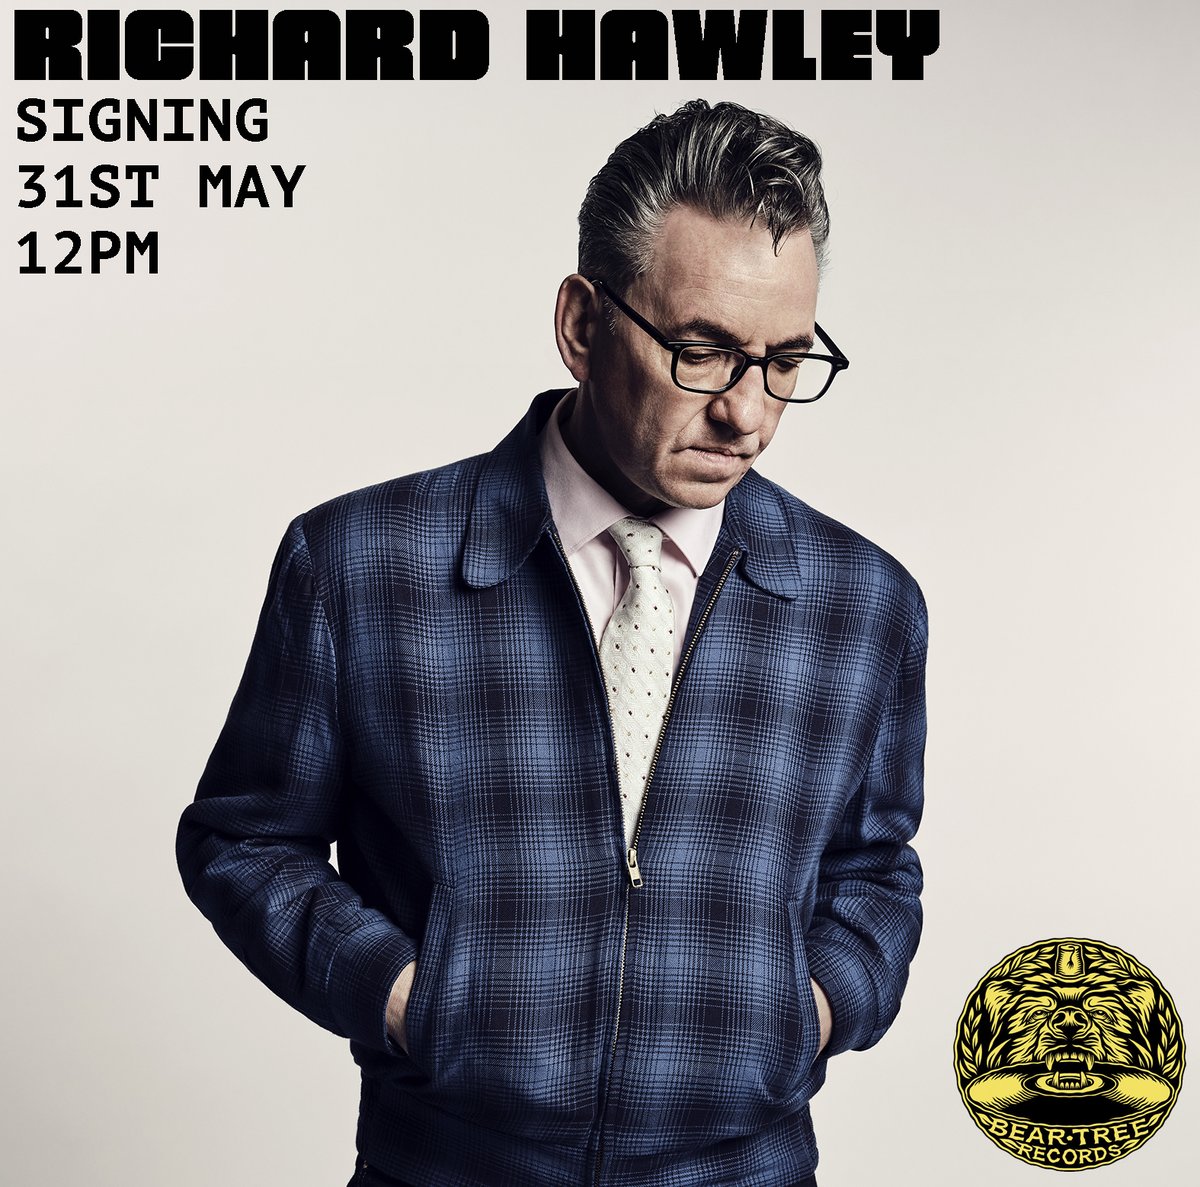 BIG ANNOUNCEMENT! We have the one and only @RichardHawley stopping by on Friday 31st May at 12pm for a signing of his brand new album 'In This City They Call You Love'. Entry to this is available by ordering the album from us, info and order on the link! beartreerecords.com/products/richa…